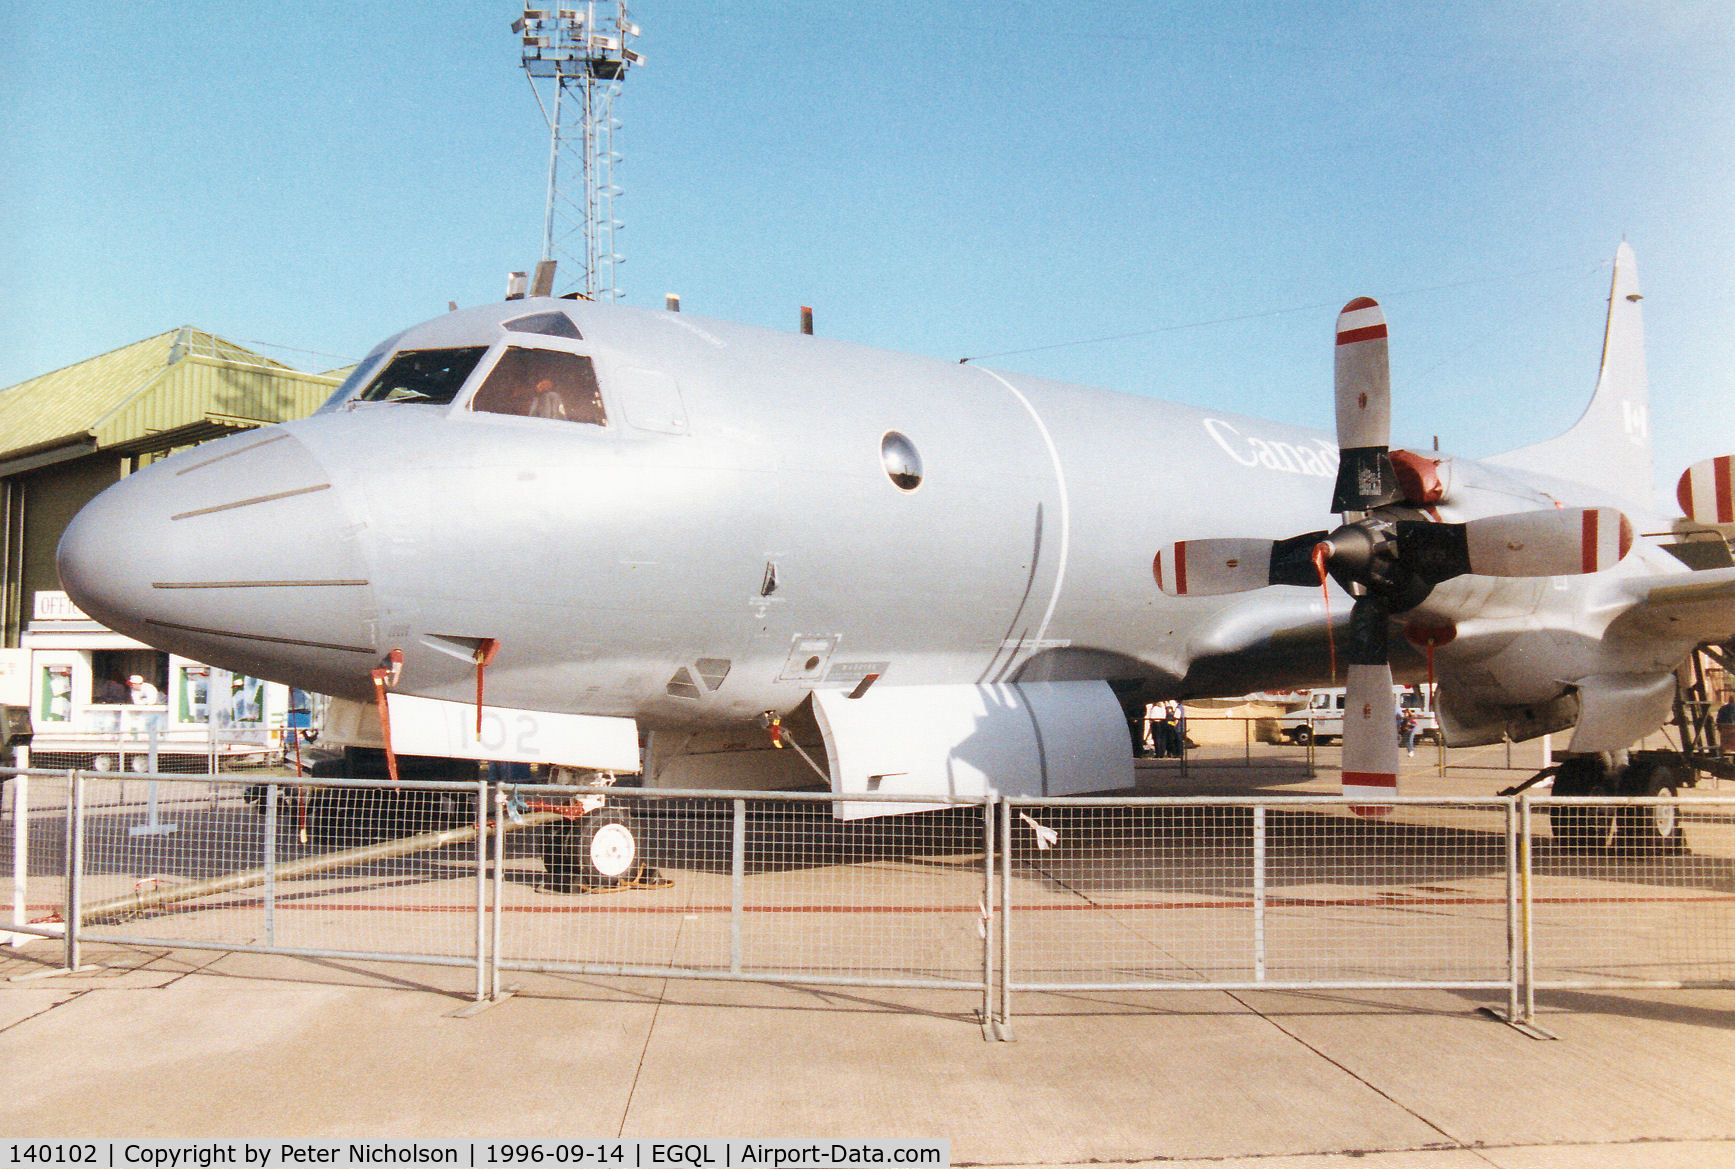 140102, Lockheed CP-140 Aurora C/N 285B-5689, CP-140 Aurora, callsign Canforce 102, of 415 Squadron/14 Wing of the Canadian Armed Forces on display at the 1996 RAF Leuchars Airshow.